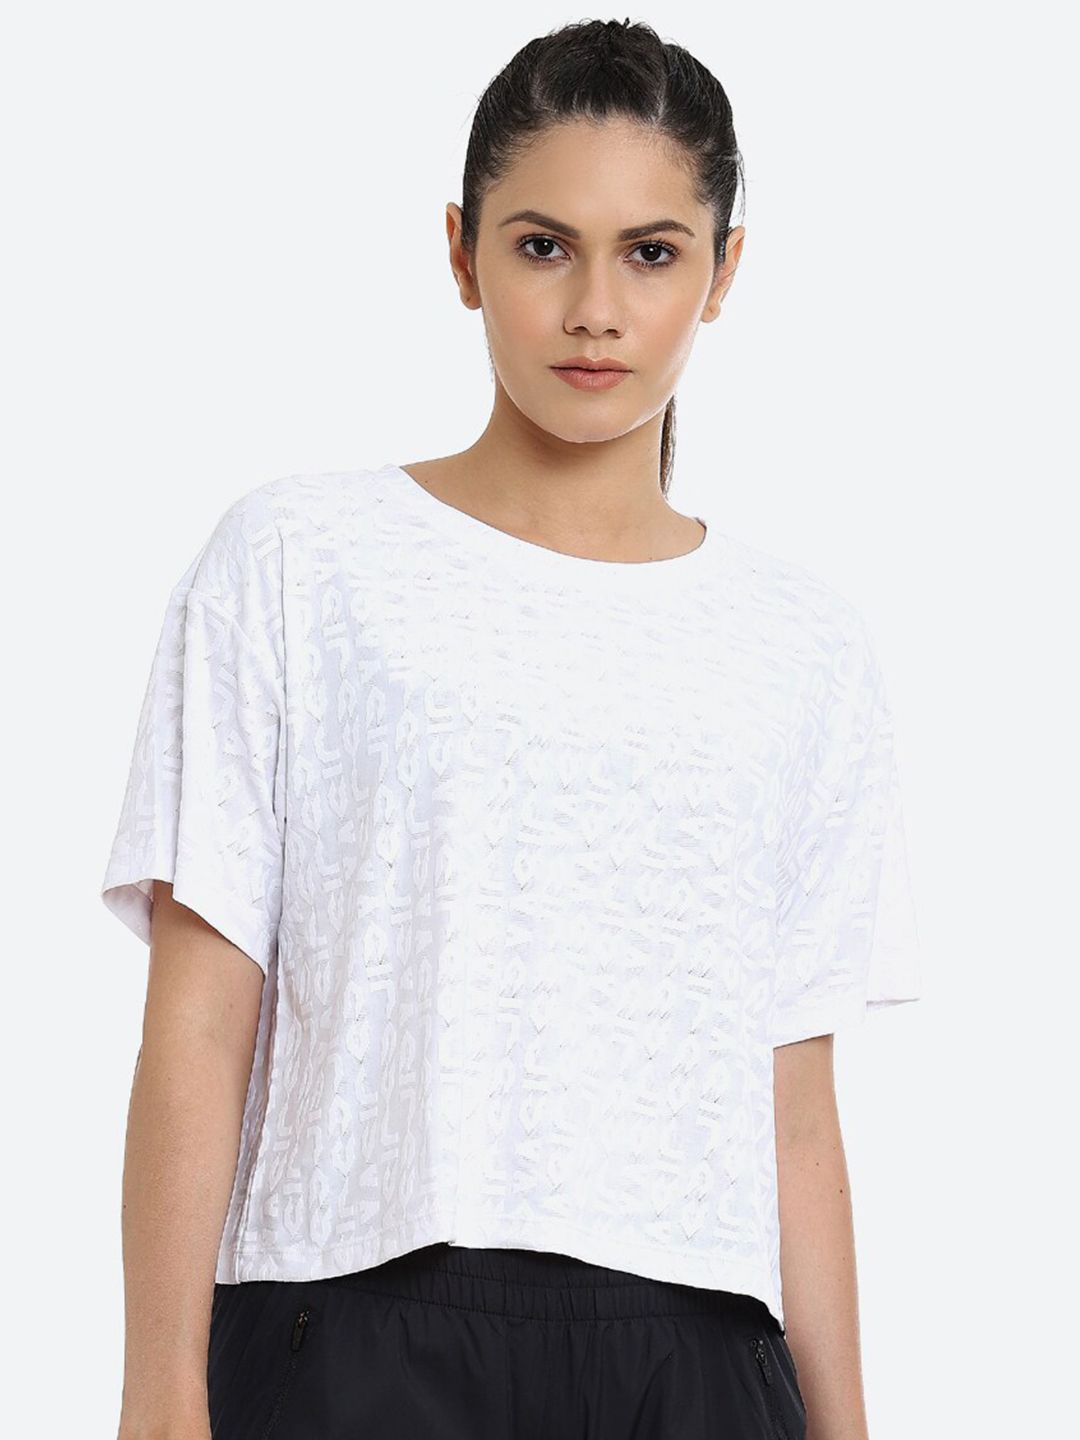 ASICS Cropped  Logo Jacquard SS  Women White Striped Extended Sleeves Raw Edge Training T-shirt Price in India